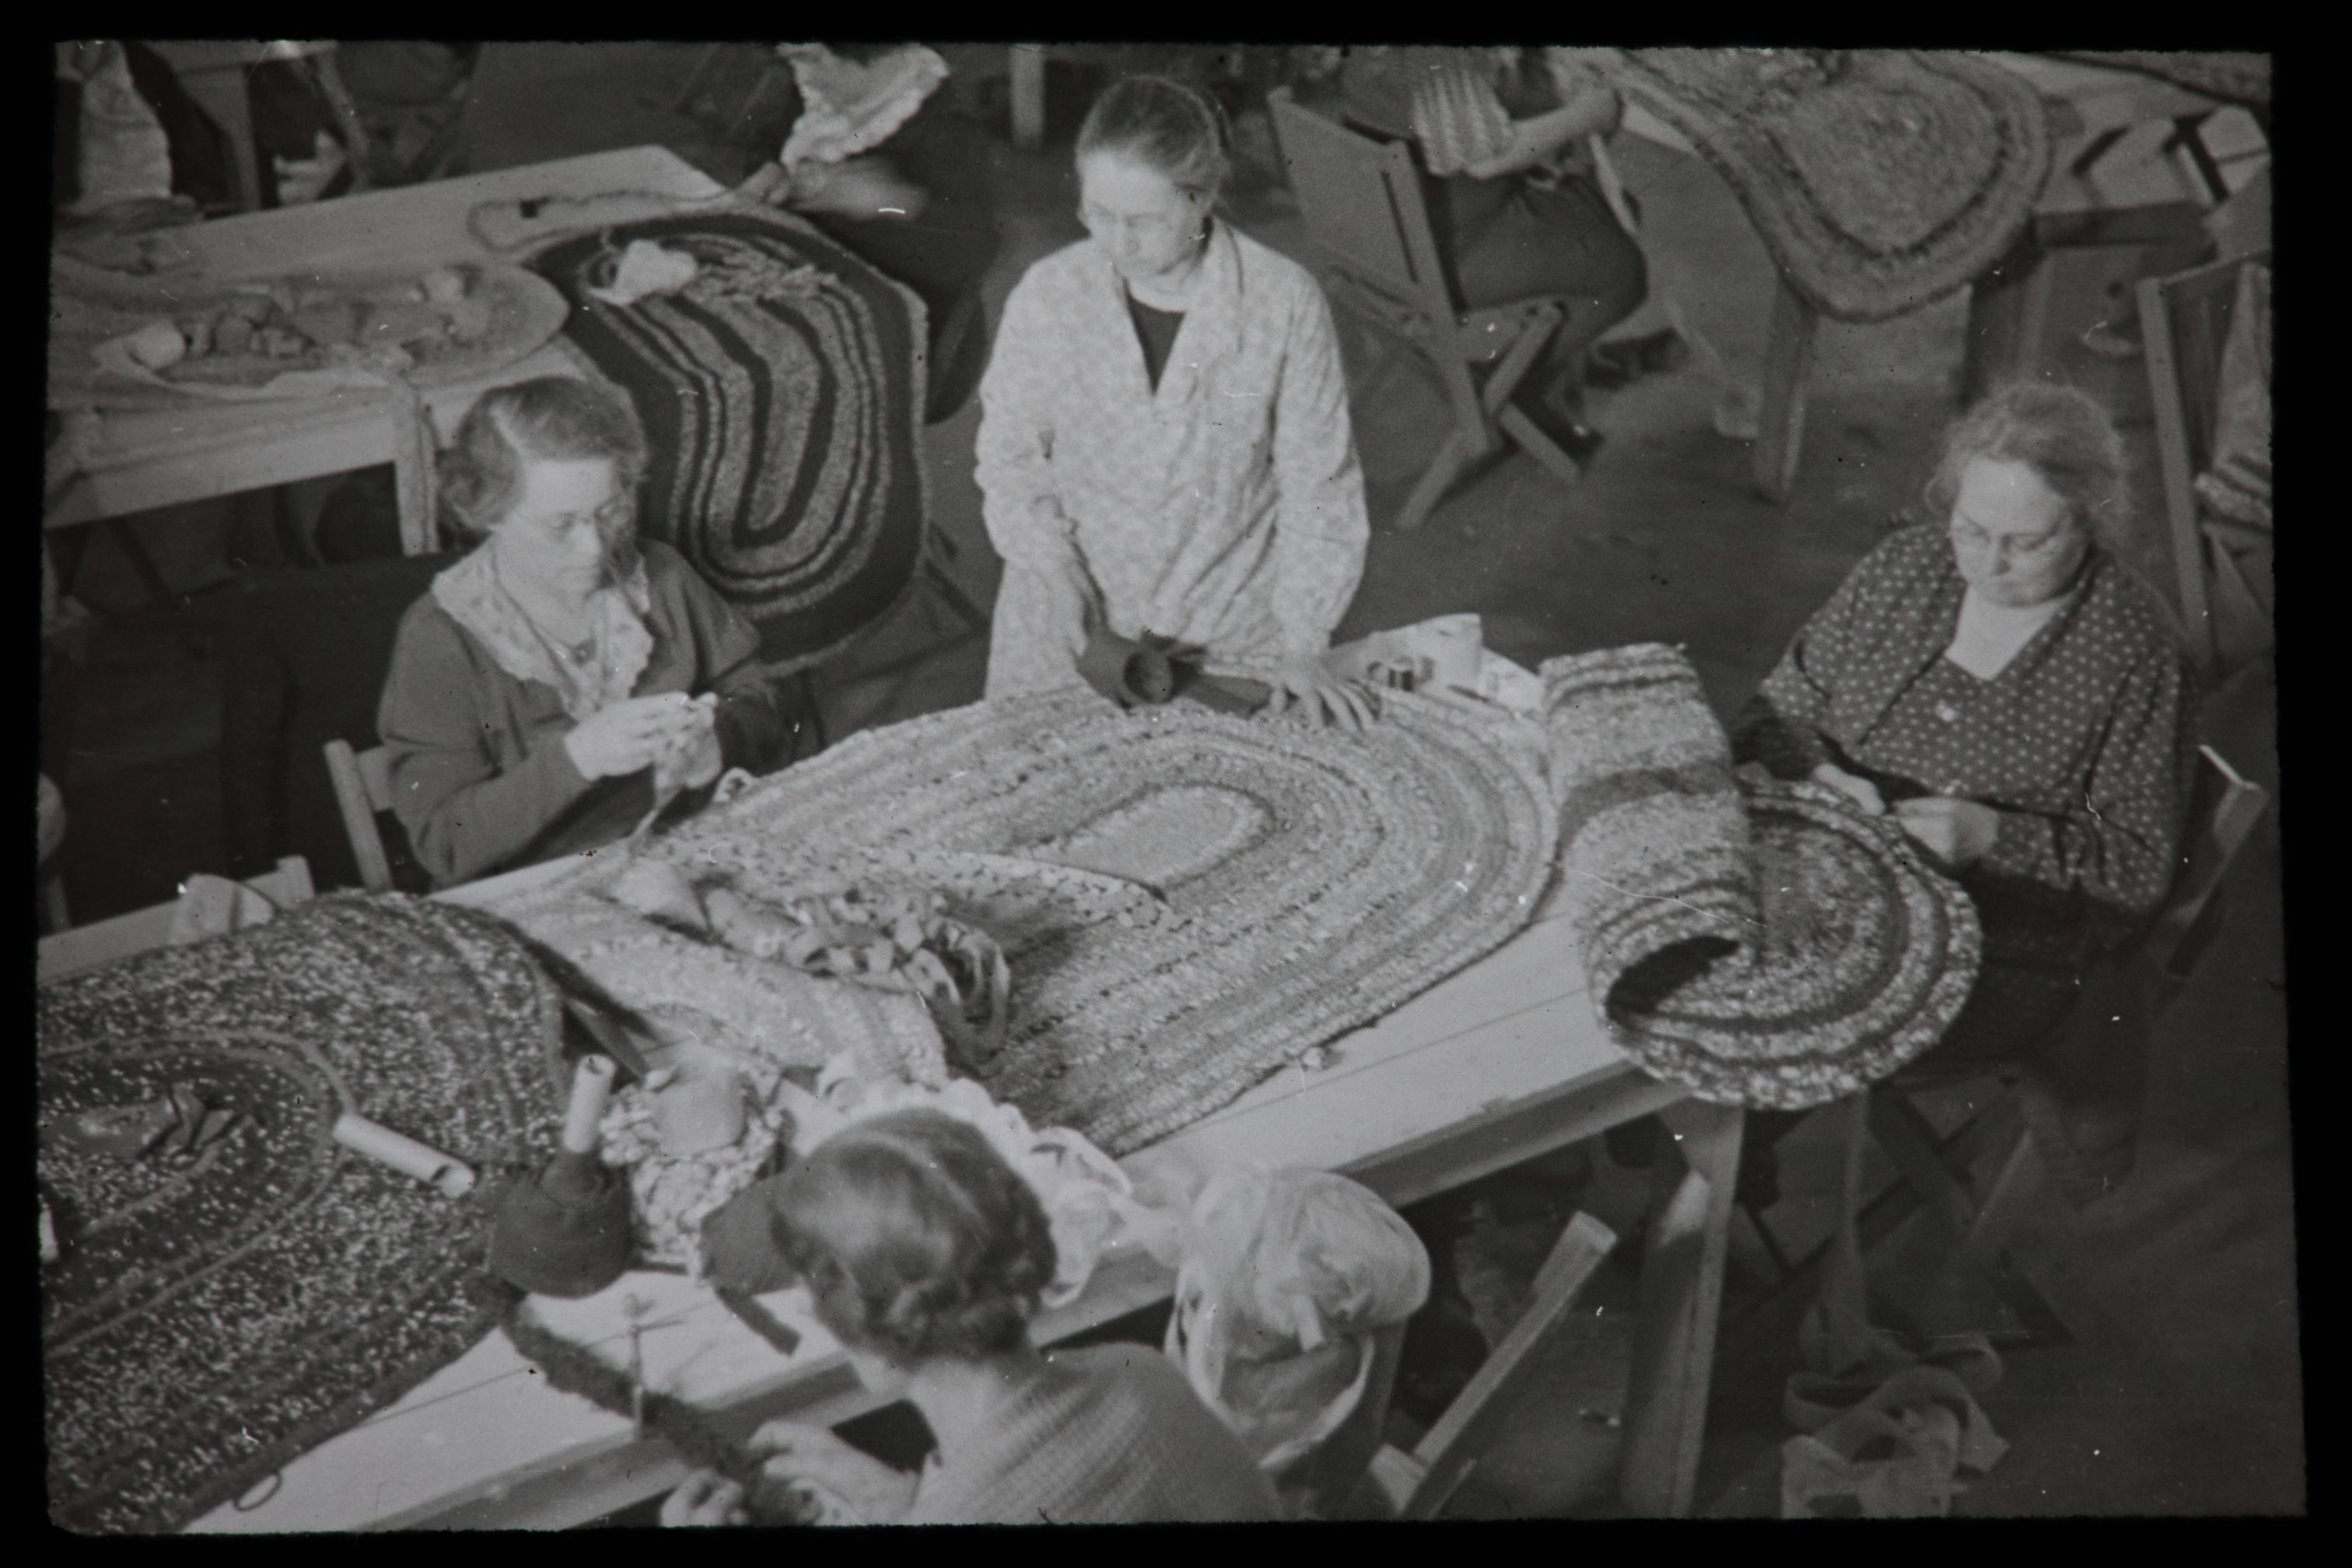 Four women work to make crochet rugs as part of the Milwaukee Handicraft Project. Begun in 1935, the project was designed to provide women with employment during the Great Depression.